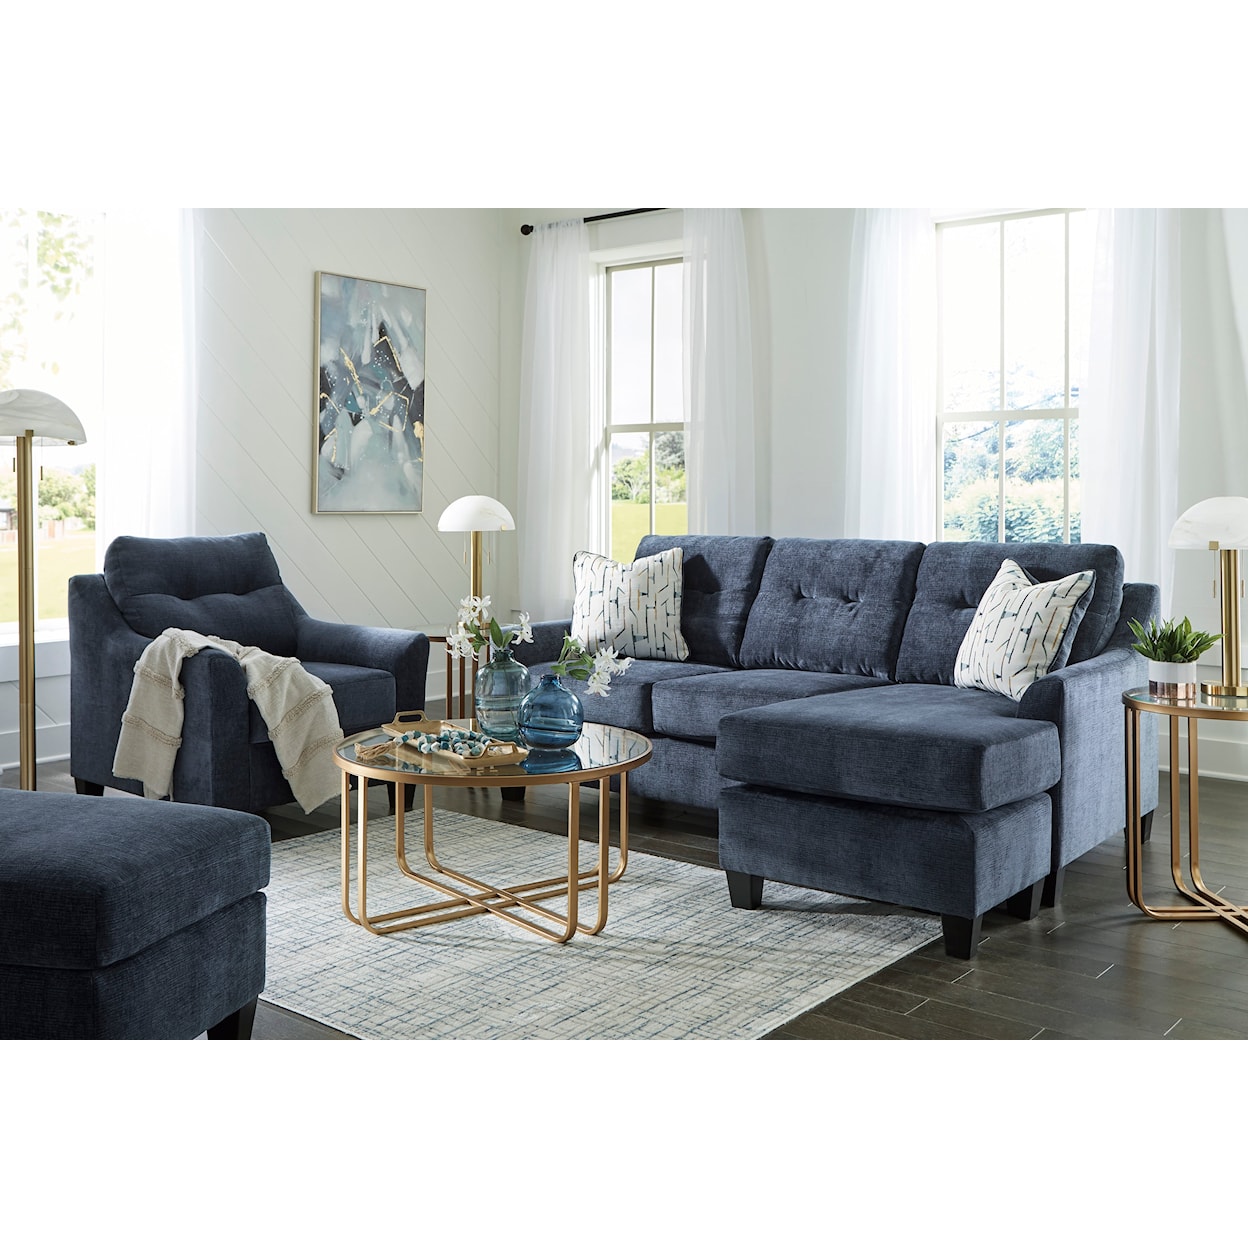 Benchcraft Amity Bay Sofa Chaise, Chair, and Ottoman